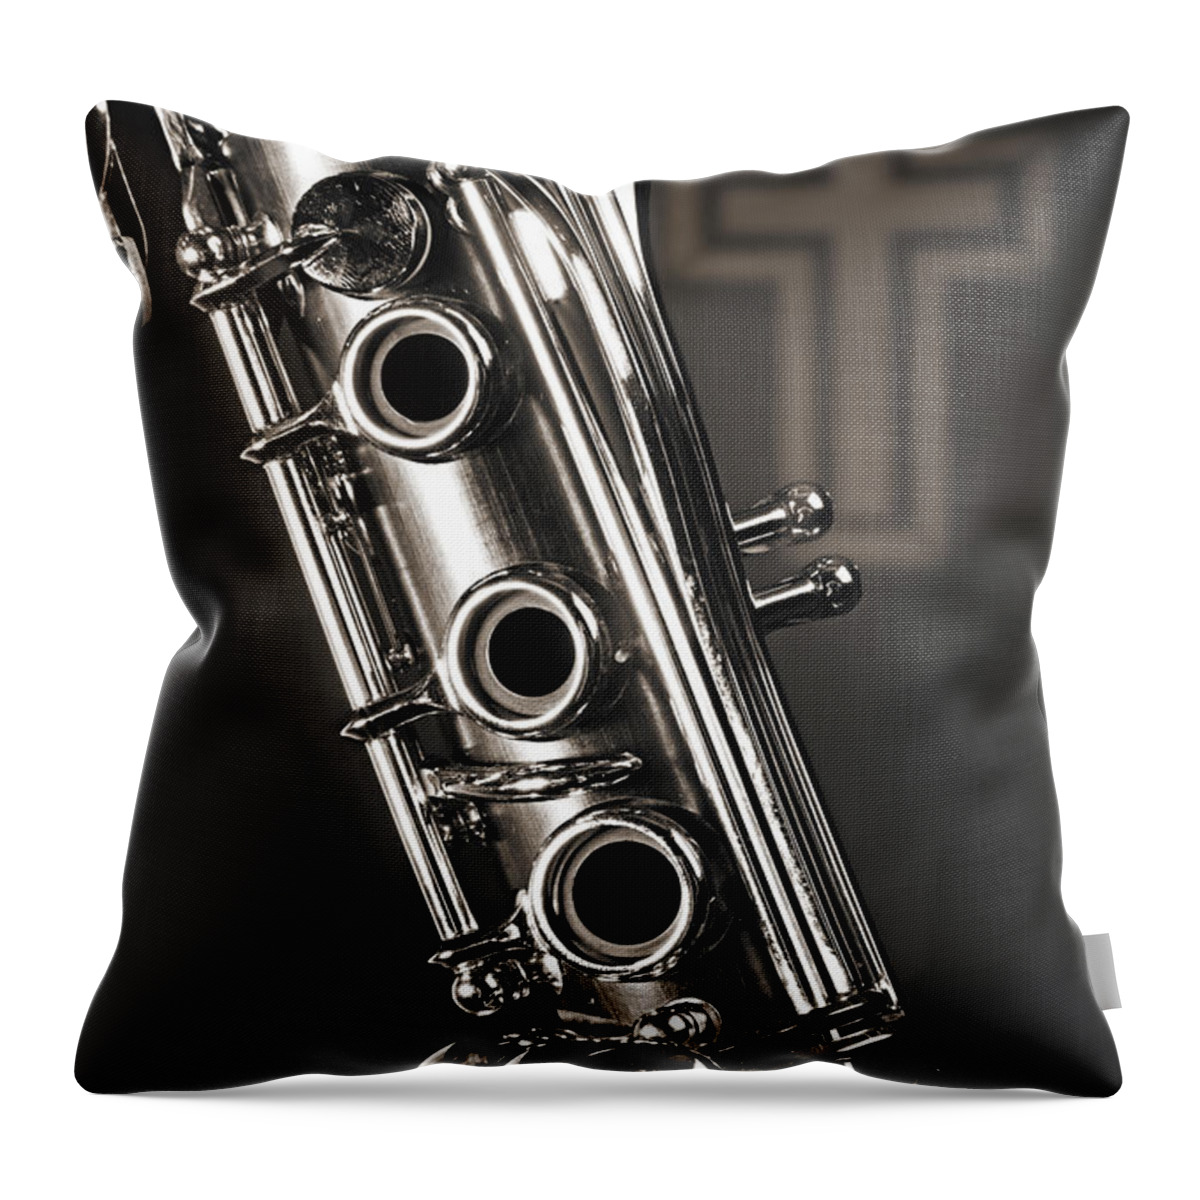 Clarinet Throw Pillow featuring the photograph Clarinet Music Instrument with a Cross 3521.01 by M K Miller